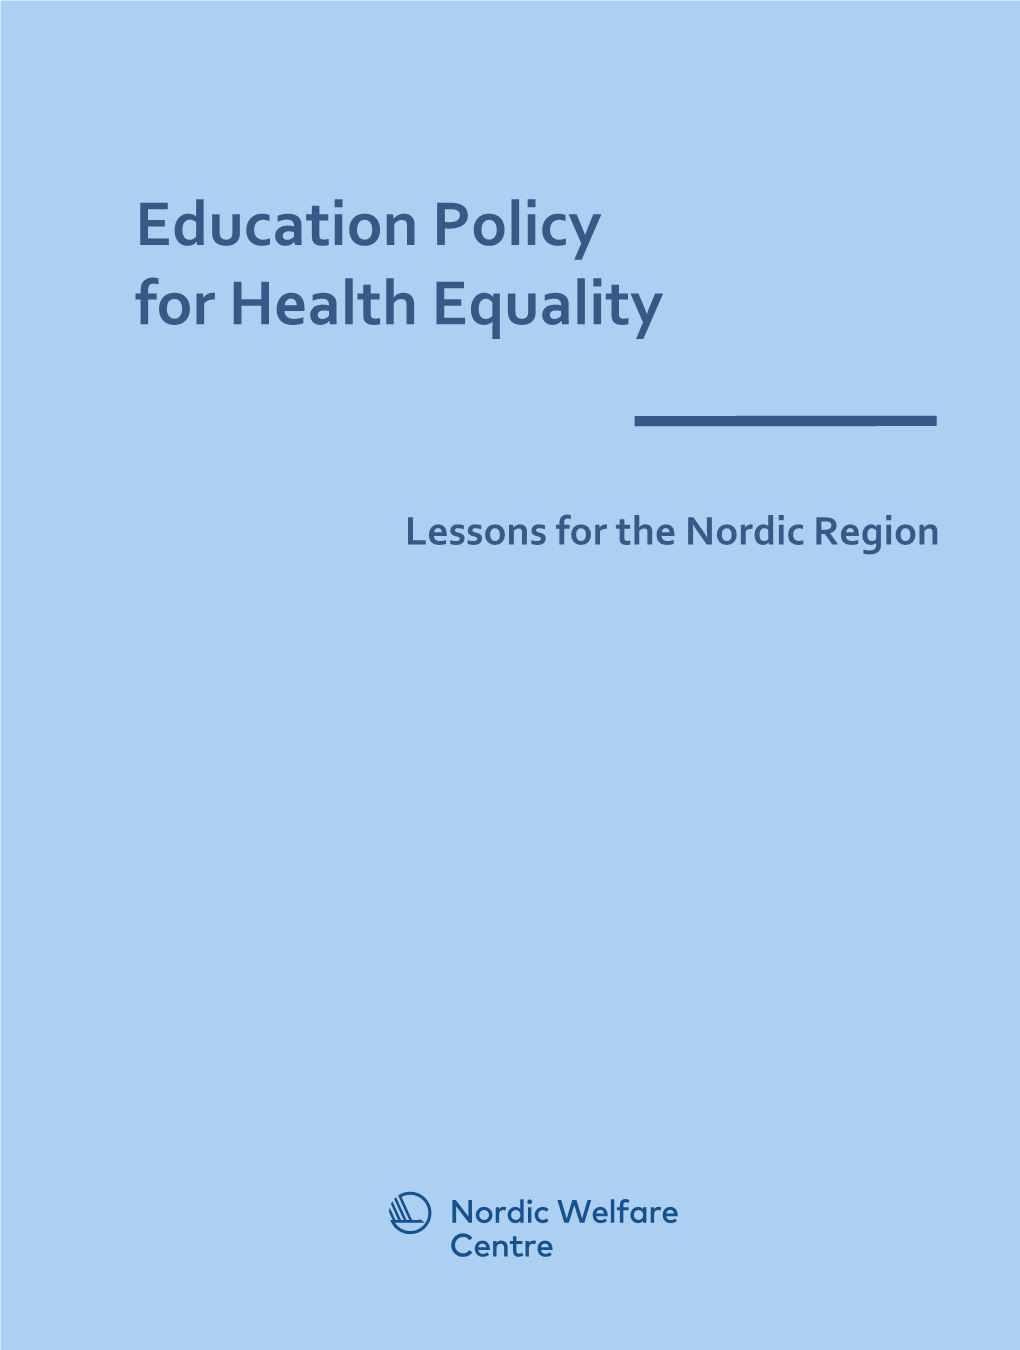 Education Policy for Health Equality